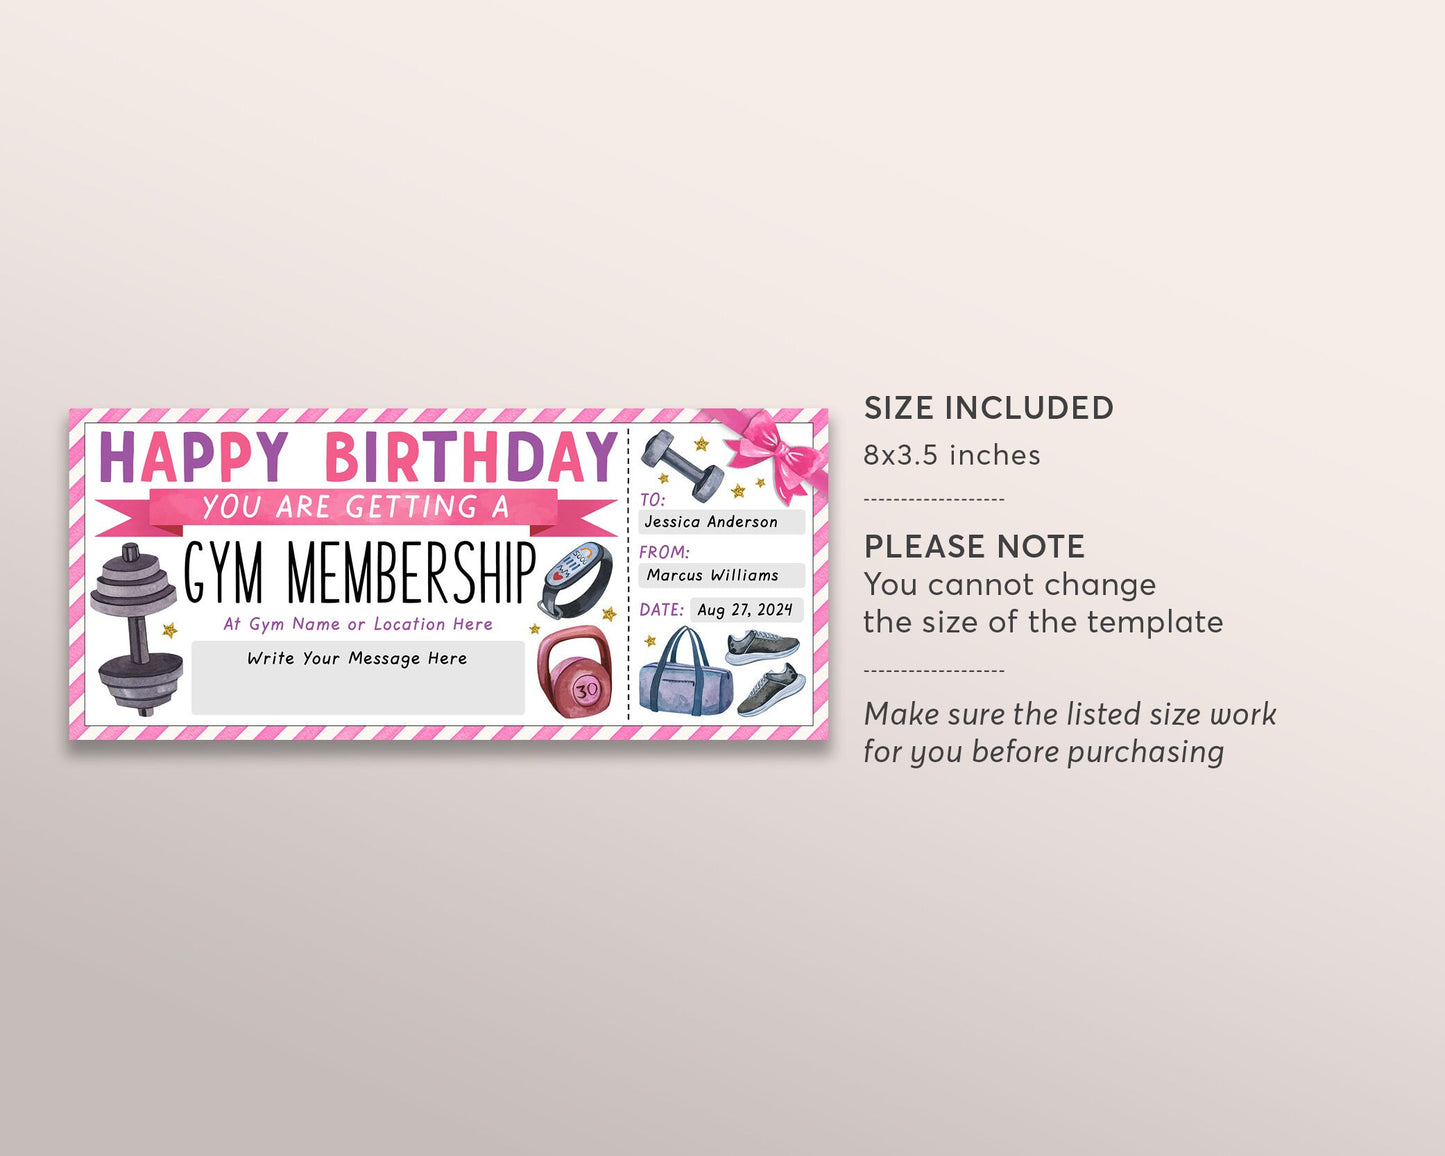 Gym Membership Ticket Editable Template, Birthday Surprise Personal Trainer Sports Voucher Gift Certificate For Her, Workout Fitness Pass